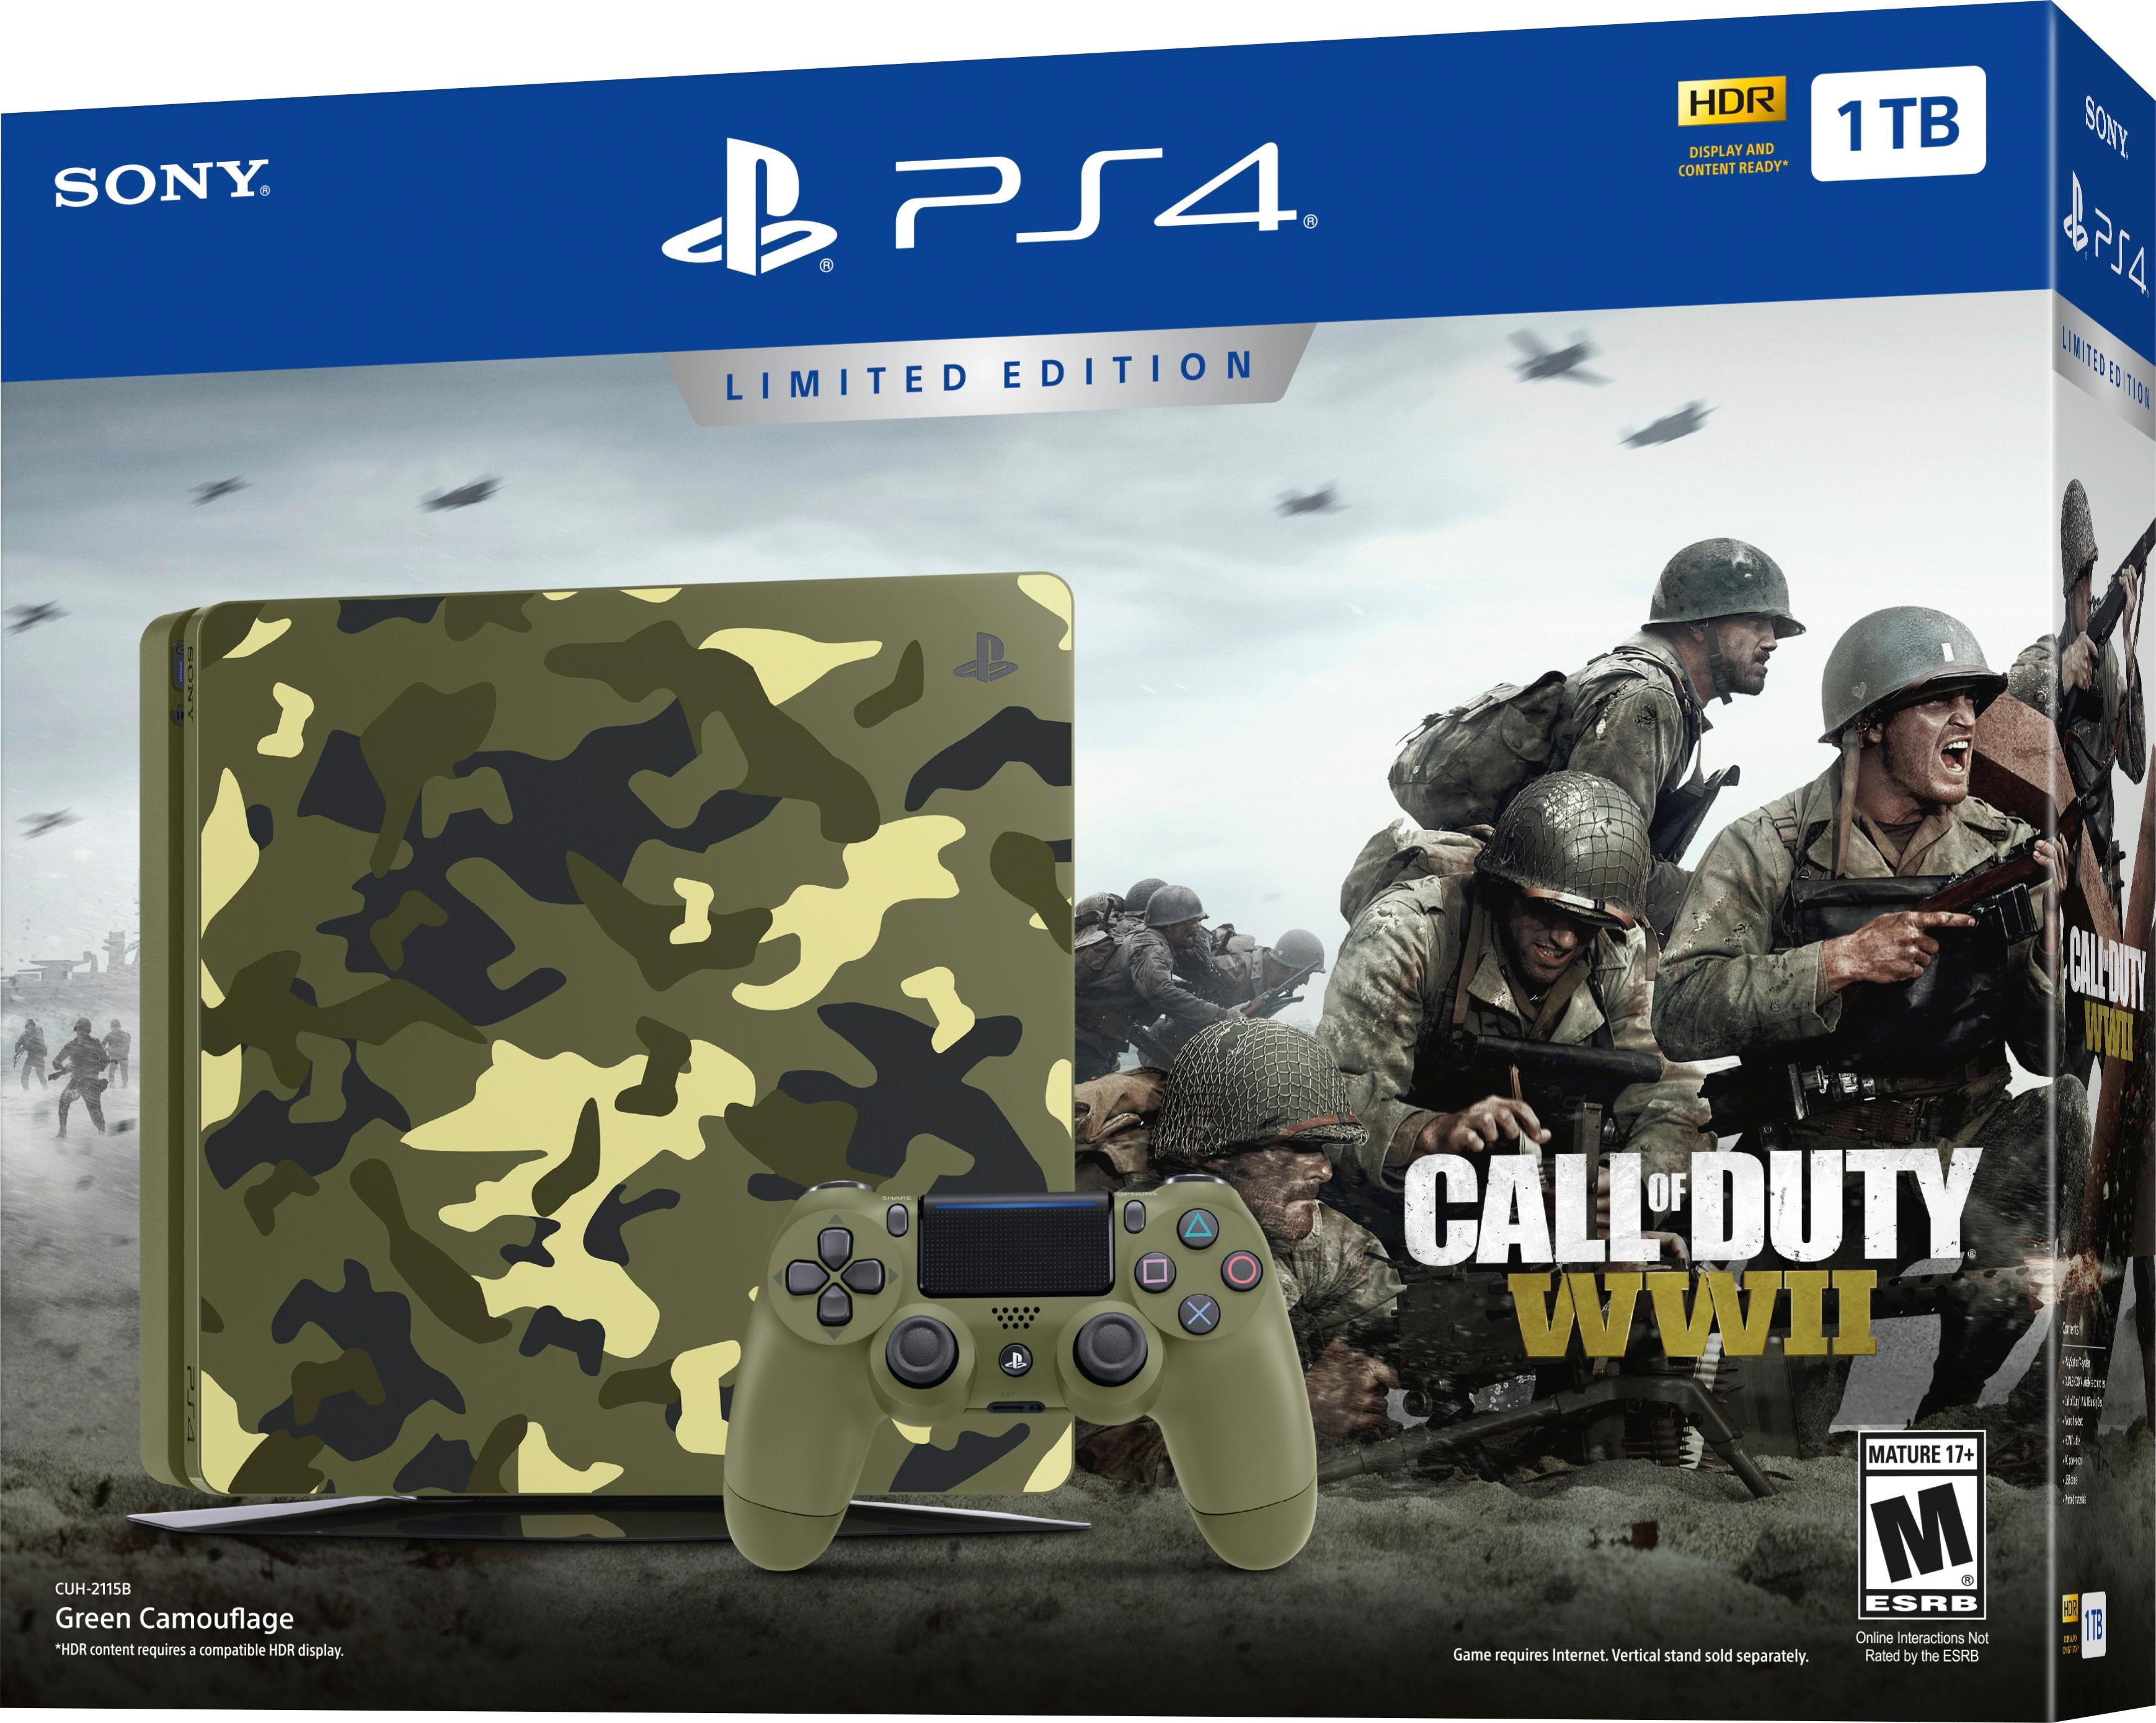 Call of Duty: WWII download size for PC and PlayStation 4 revealed;  Pre-load now available